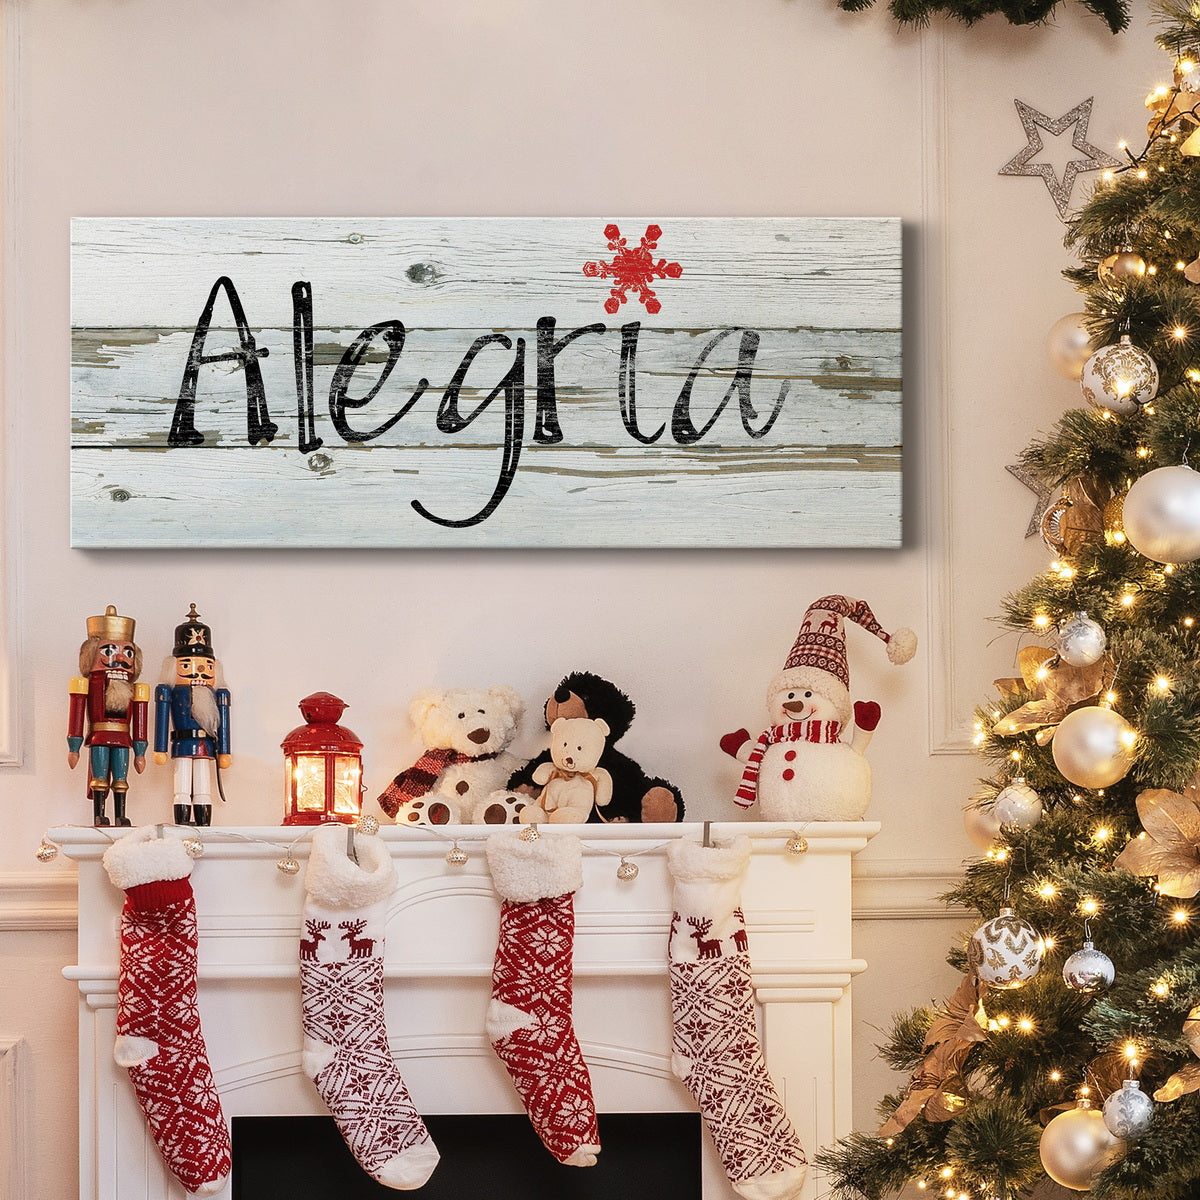 Alegria Premium Gallery Wrapped Canvas - Ready to Hang